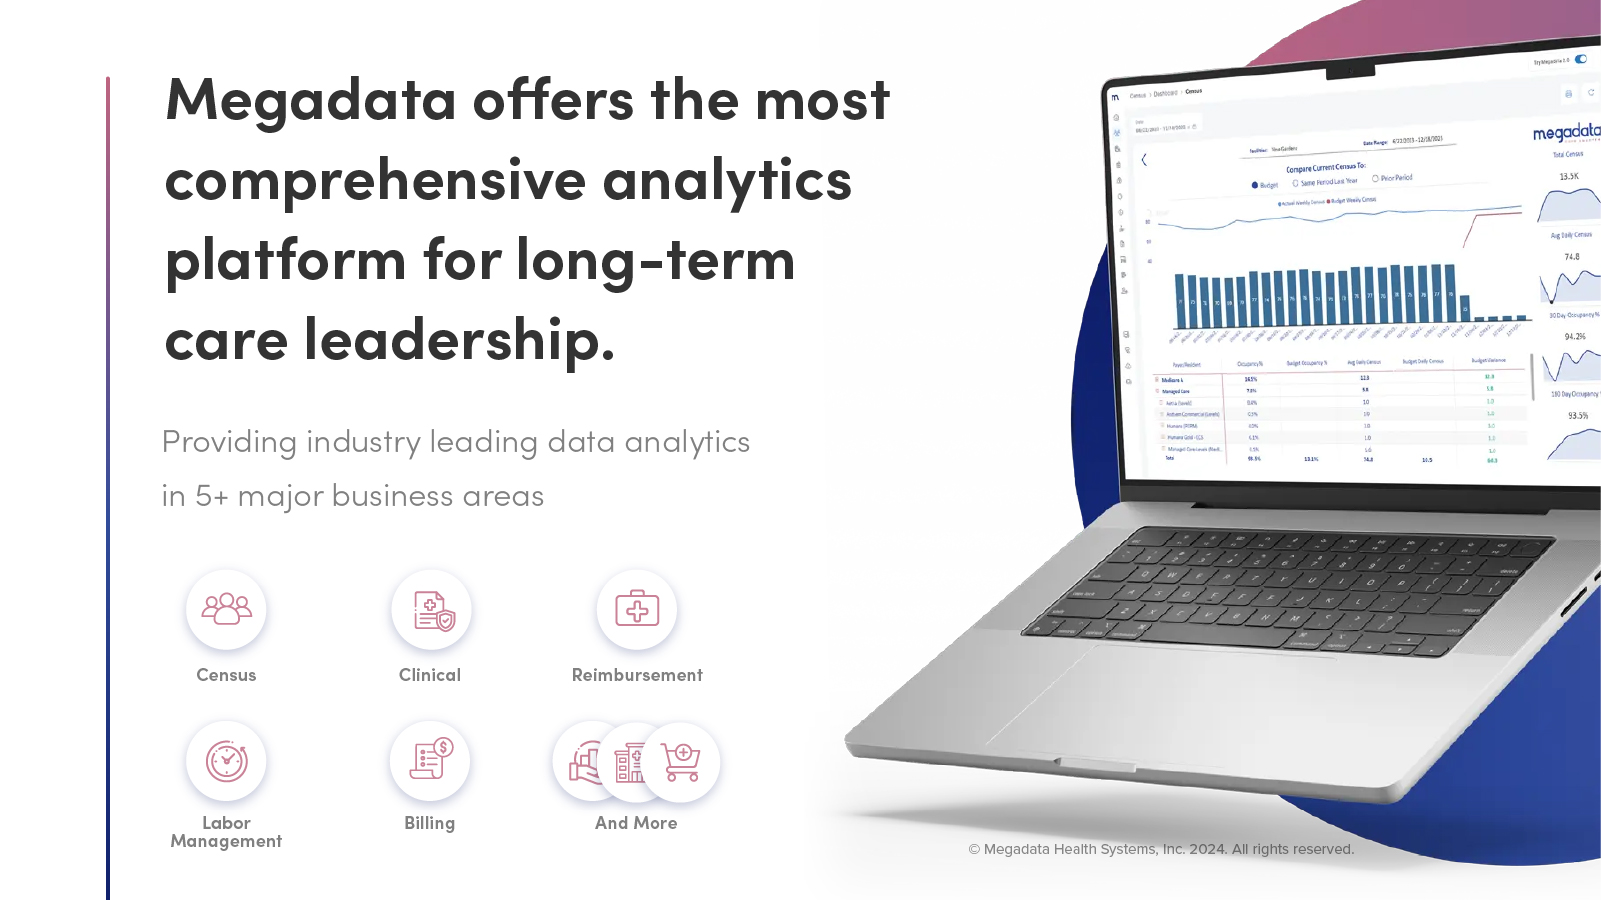 Megadata offers unparalleled analytics in 8+ key business categories for SNFs and ALFs